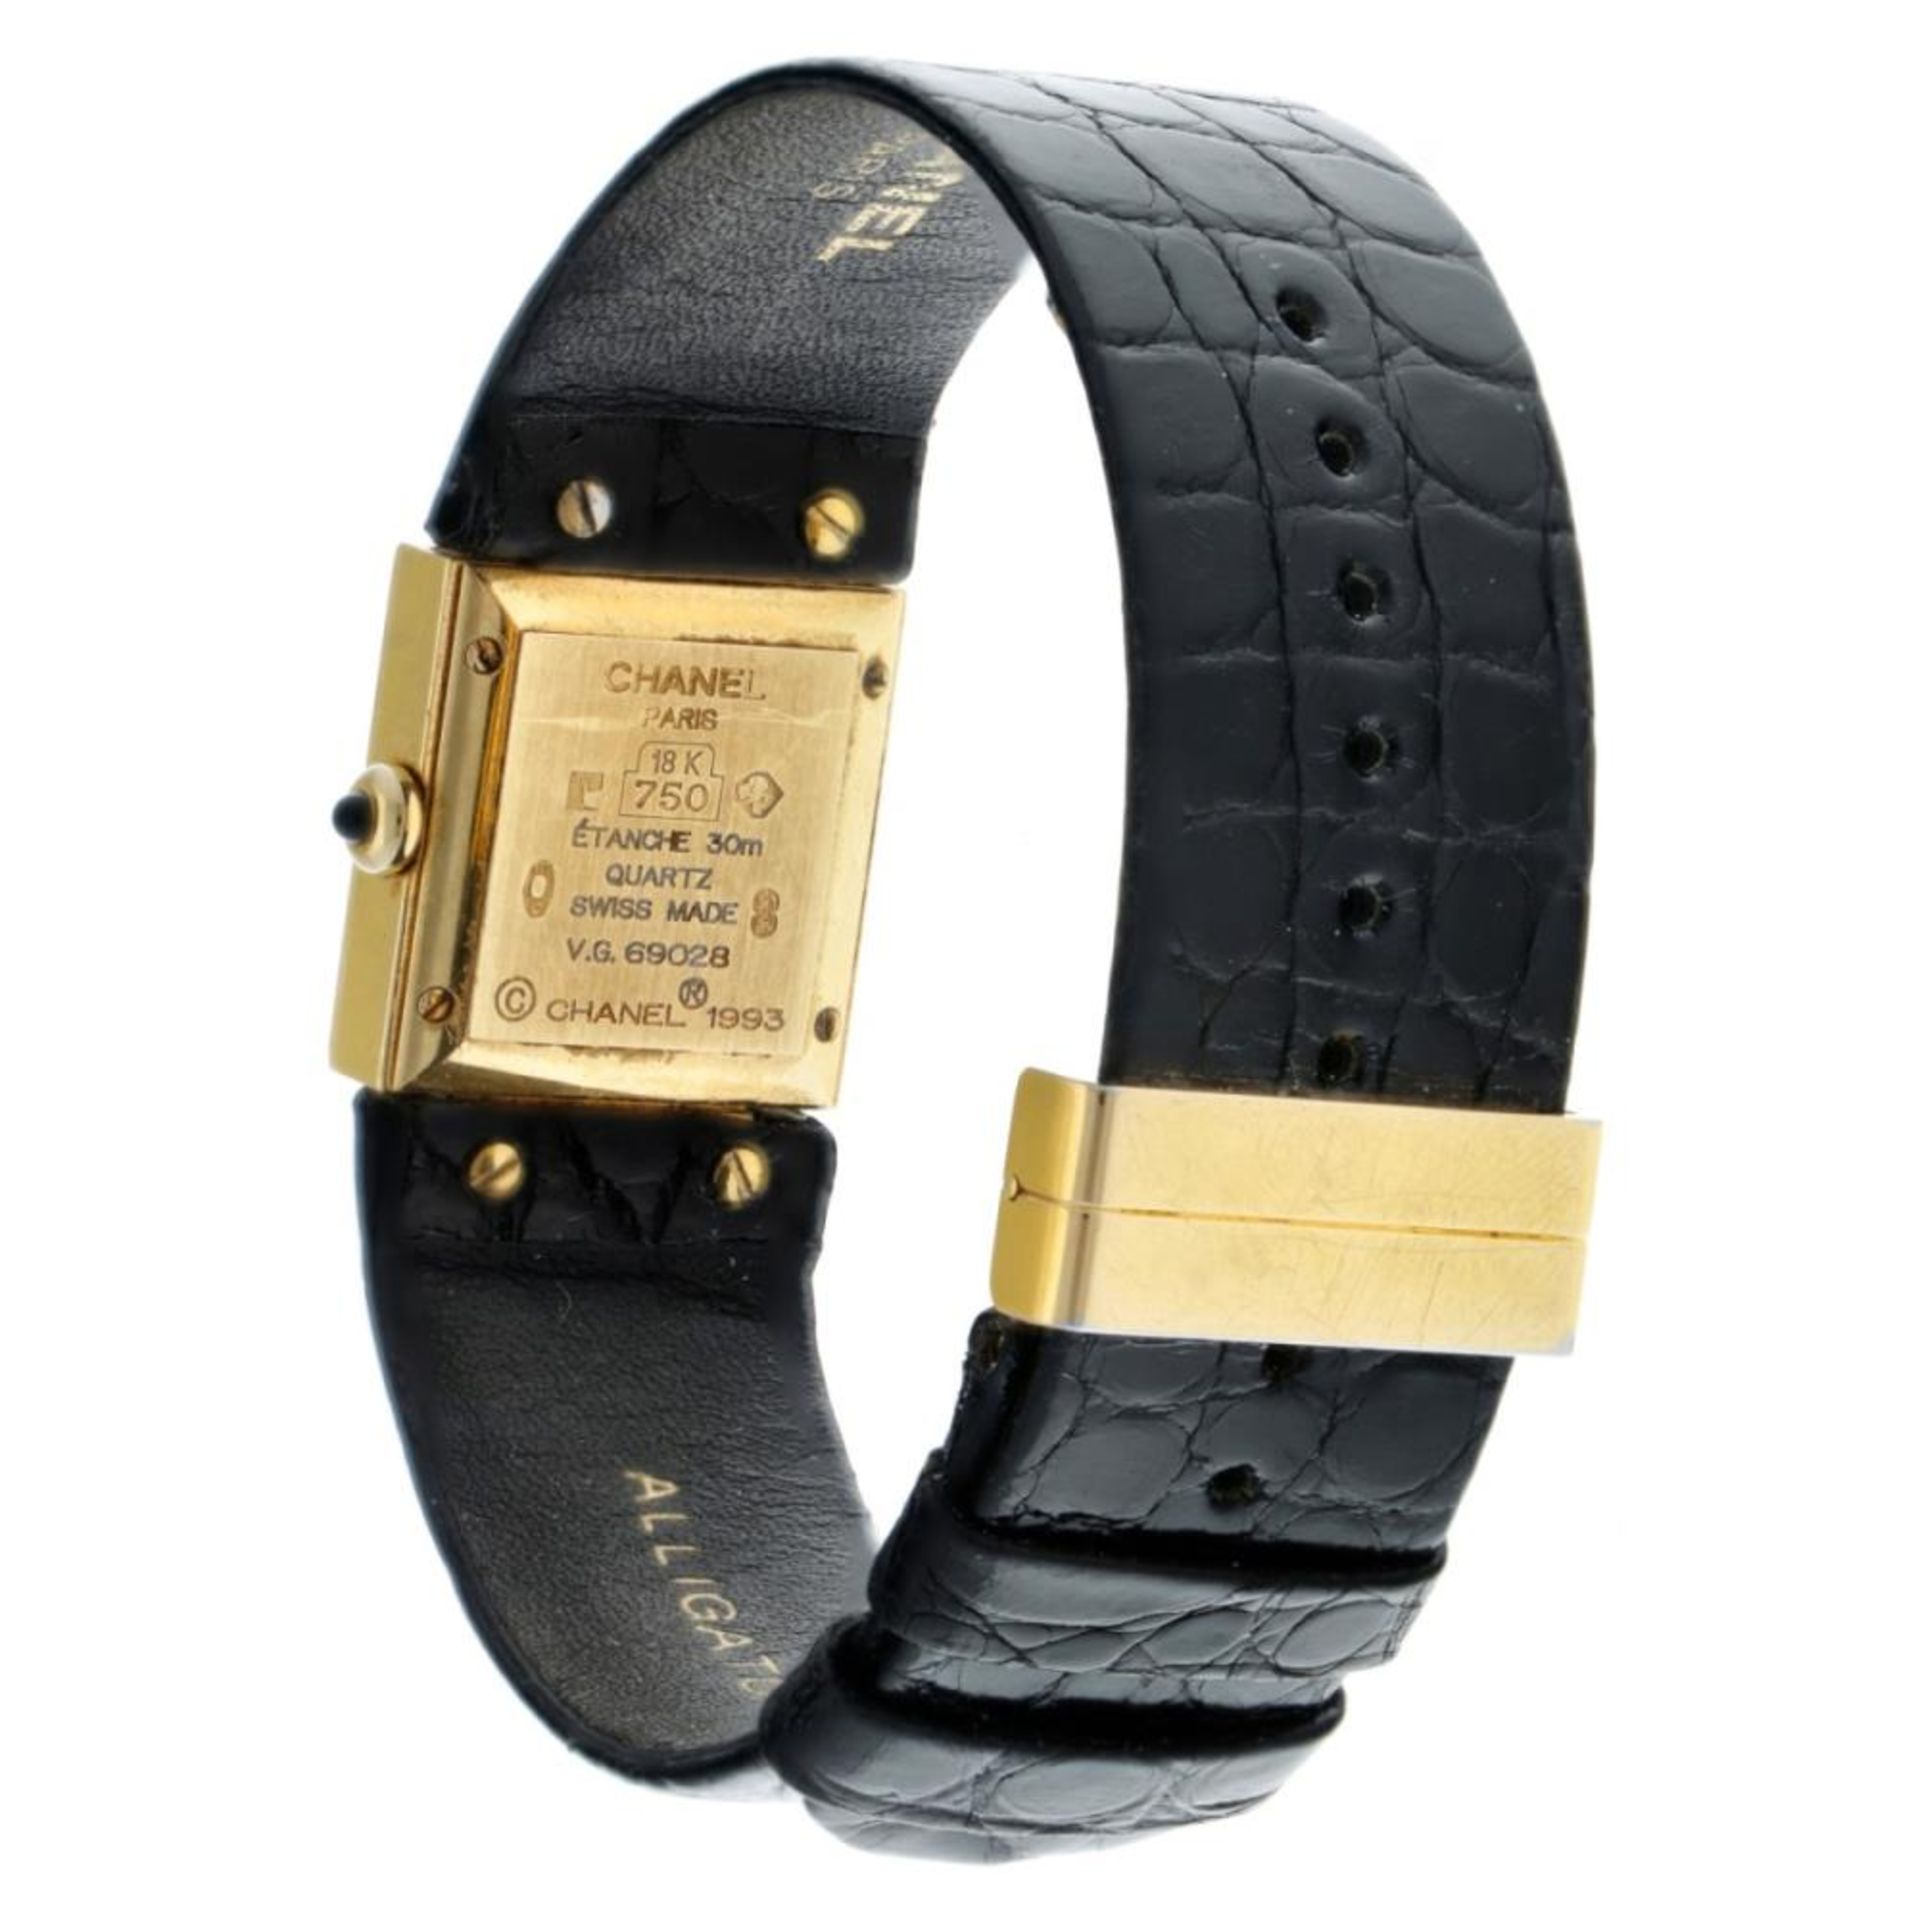 Chanel Matelasse H0111 - Ladies watch - approx. 1995. - Image 6 of 12